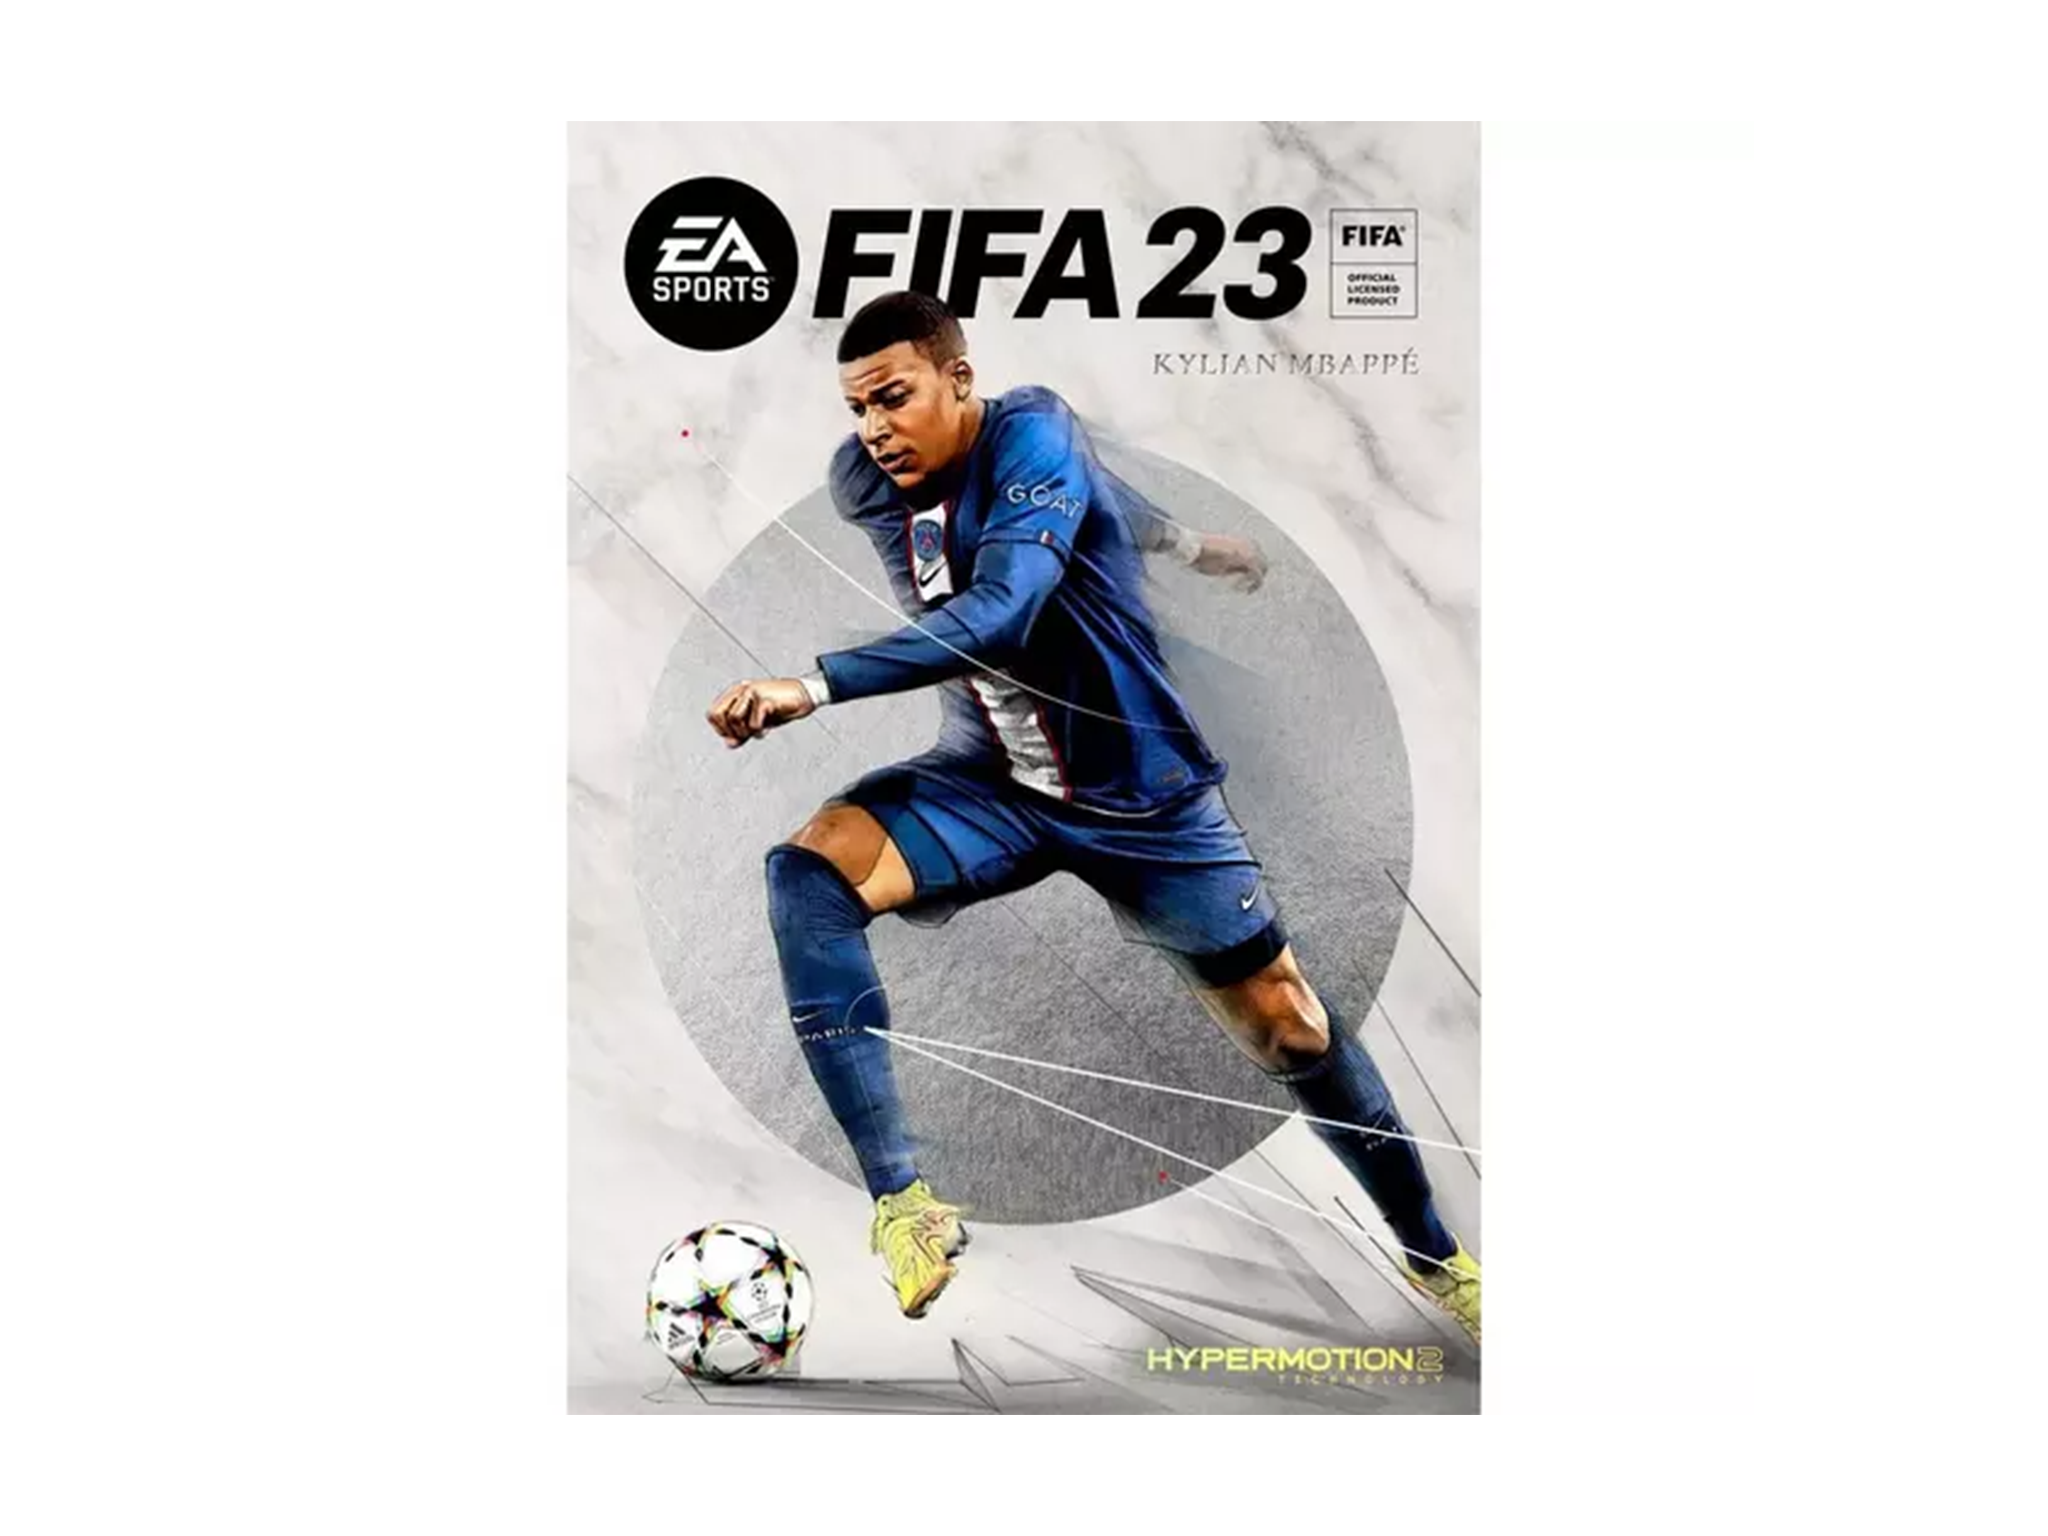 FIFA 23 review - a fitting end to a brilliant and grotesque era